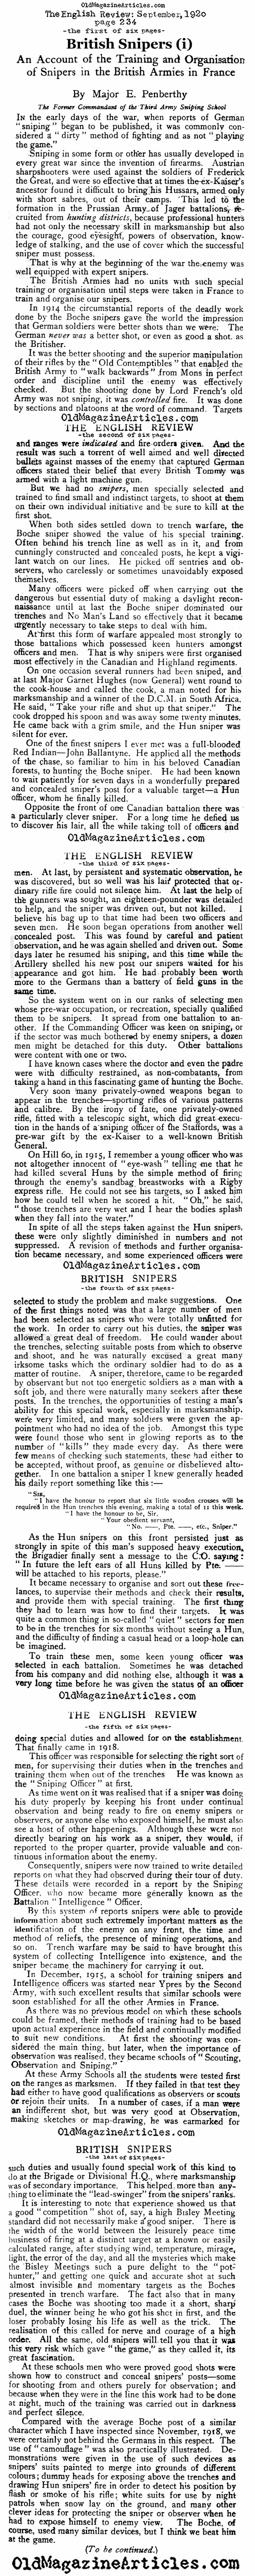 British Snipers on the Western Front (The English Review, 1920)